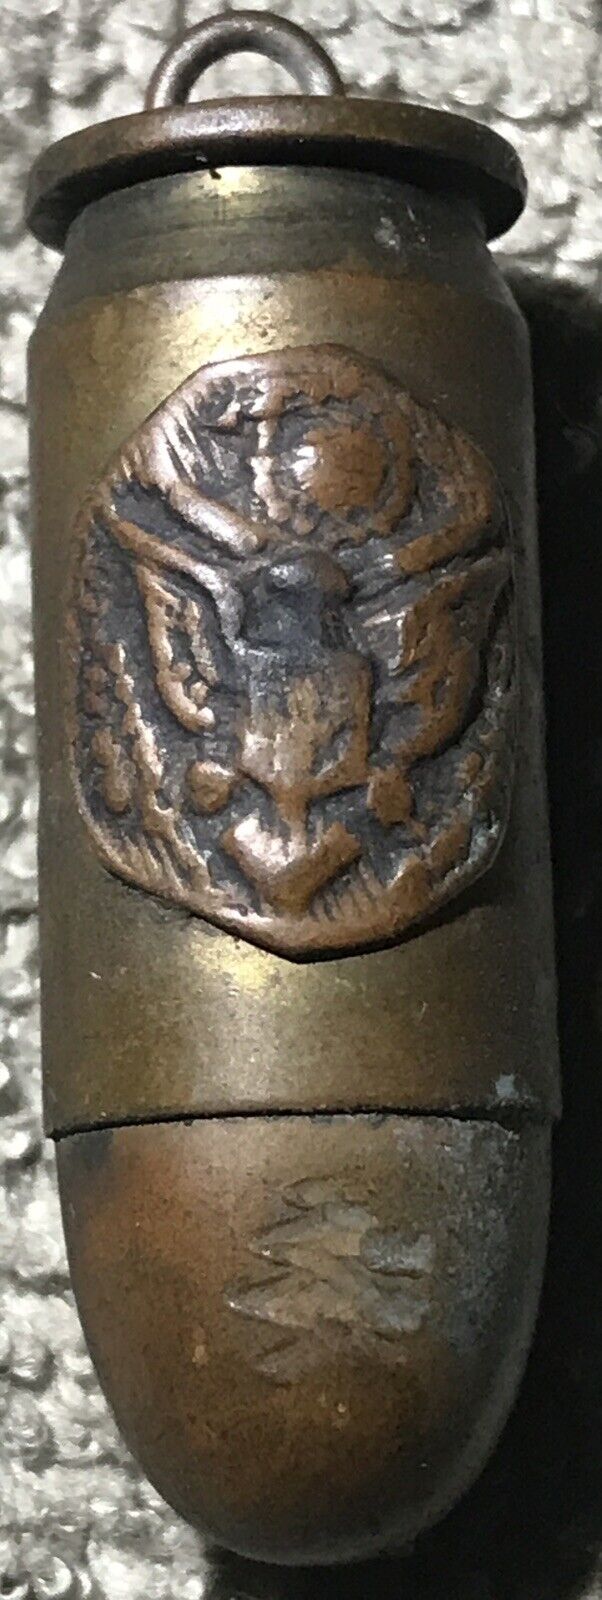 Vintage WWI Trench Art 45 Cal Bullet Necklace Charm Army Eagle Emblem Shell Rare